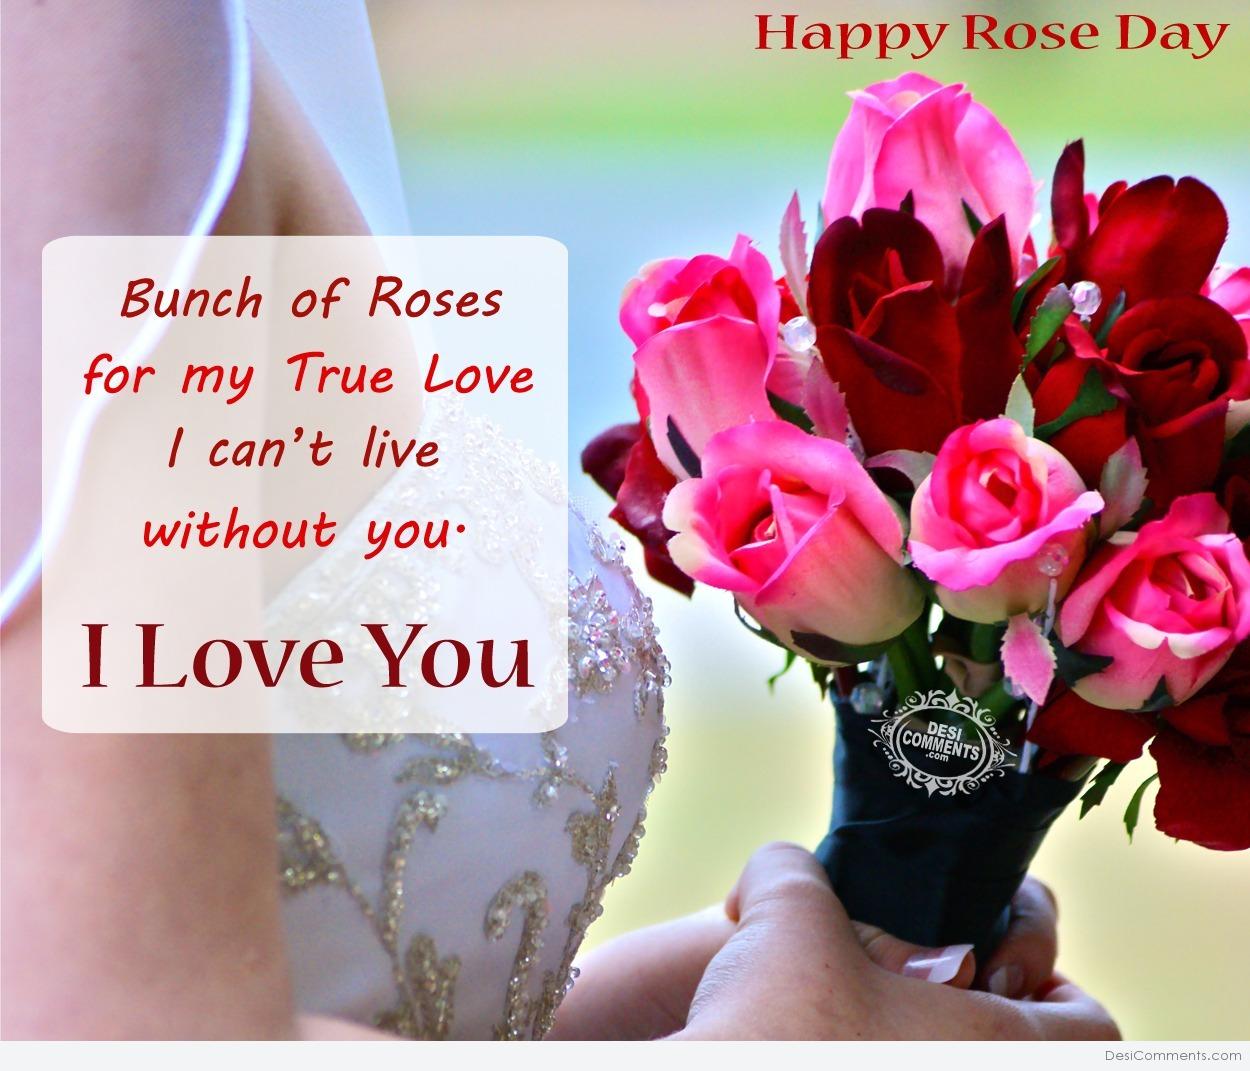 Happy Rose Day – Bunch of roses for my true love - DesiComments.com